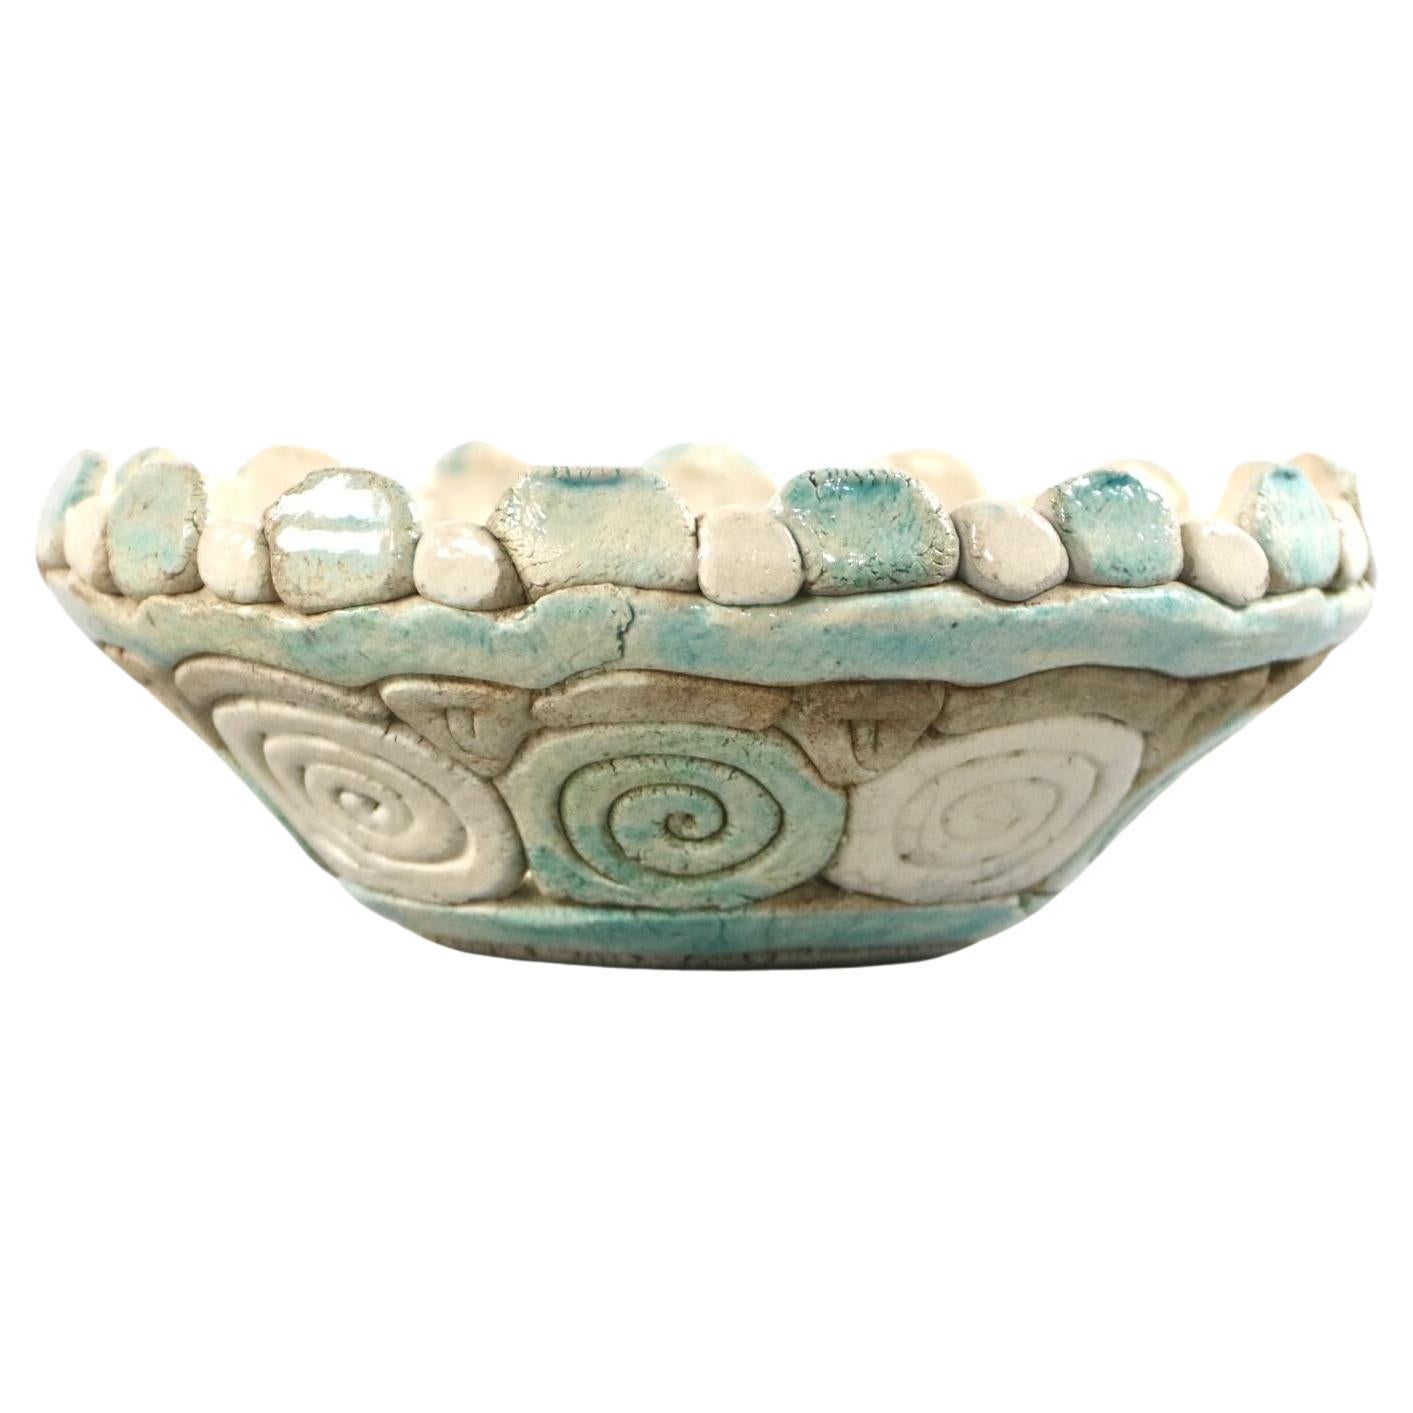 Unique organic art bowl. Raw form with a natural effect and turquoise-white color from around 1970. The mosaic-like surface is simple, yet inexhaustibly varied, and naturally exudes an atmosphere of artisanal precision and unrepeatability. The